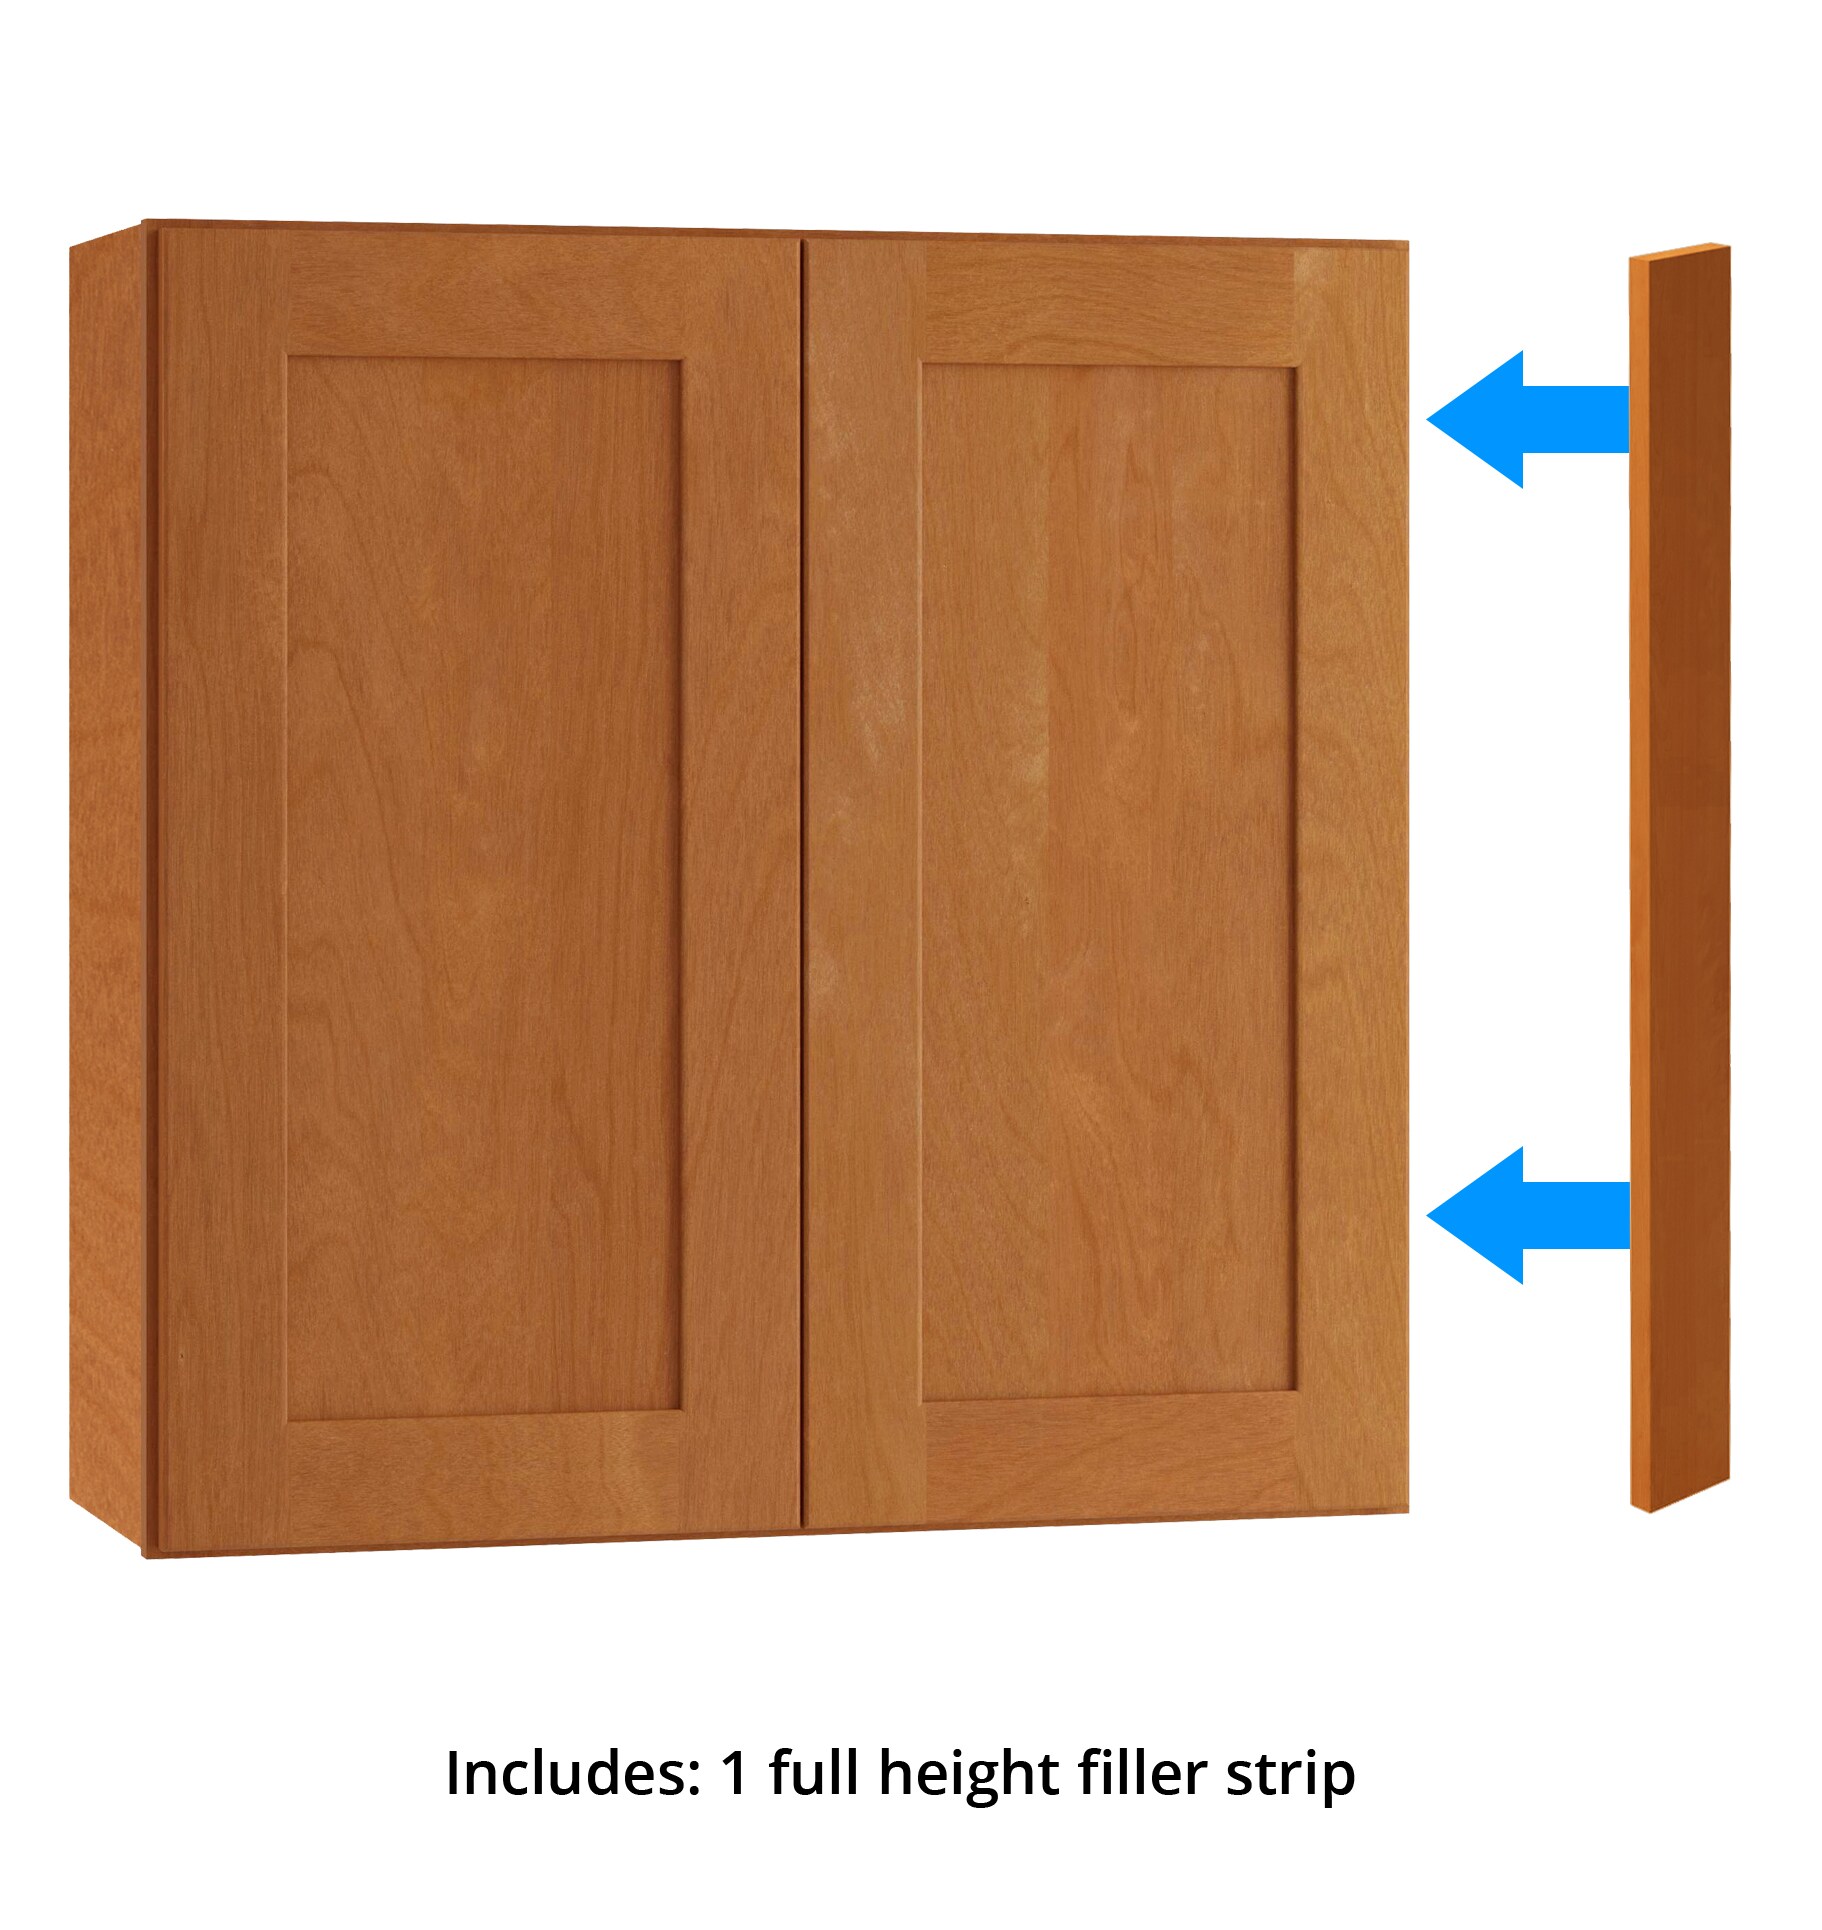 Surfaces 22.4375-in W x 0.75-in H x 10.5-in D Natural Birch Stained Cabinet Shelf Kit in Brown | WALLCABSHF24